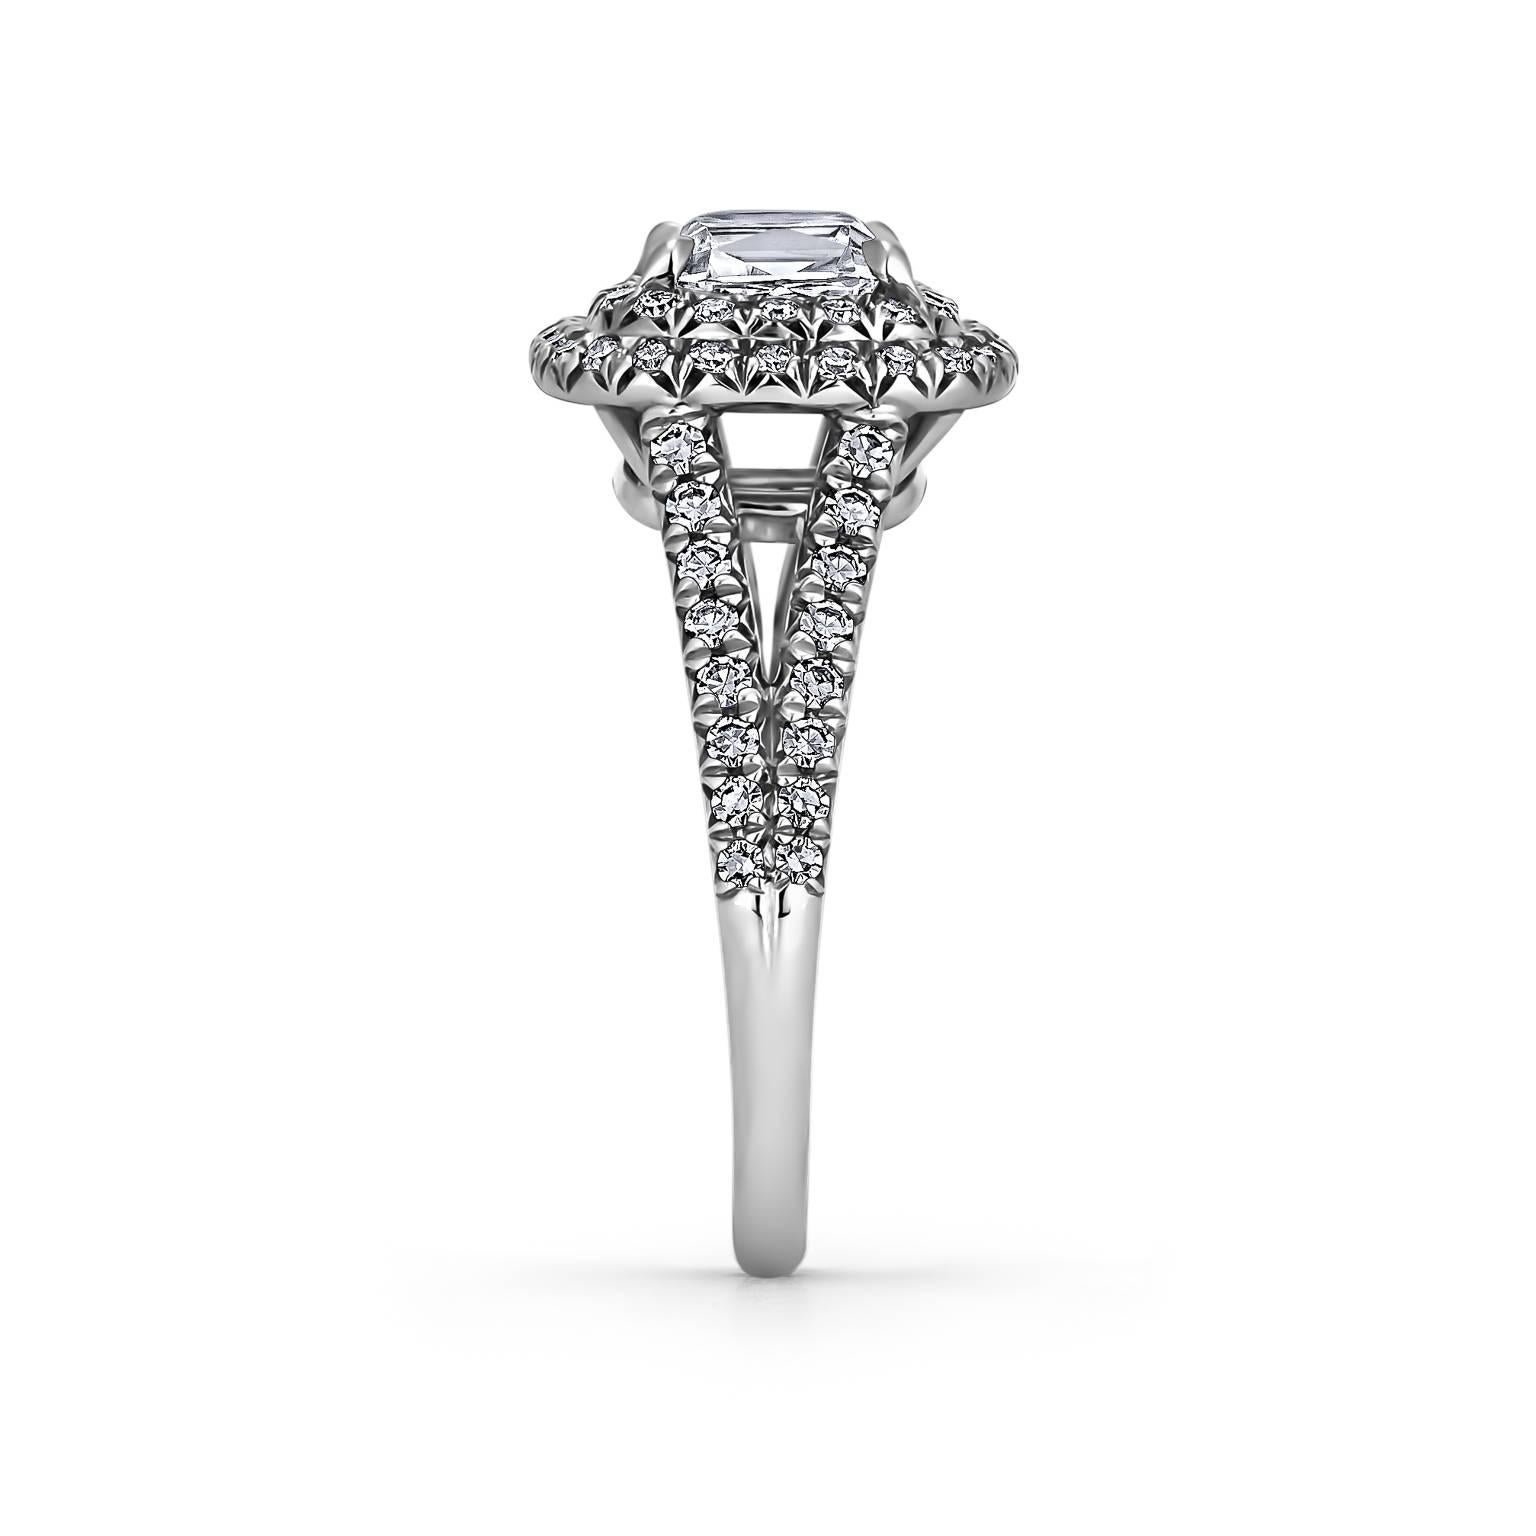 Surrounded by a double diamond halo, this 1.35 carat cushion cut center diamond is simply heavenly.  Mounted in platinum and designed by Steven Fox, it sparkles with eternal love and promise.   Center diamond color I/VVS2.  GIA certification